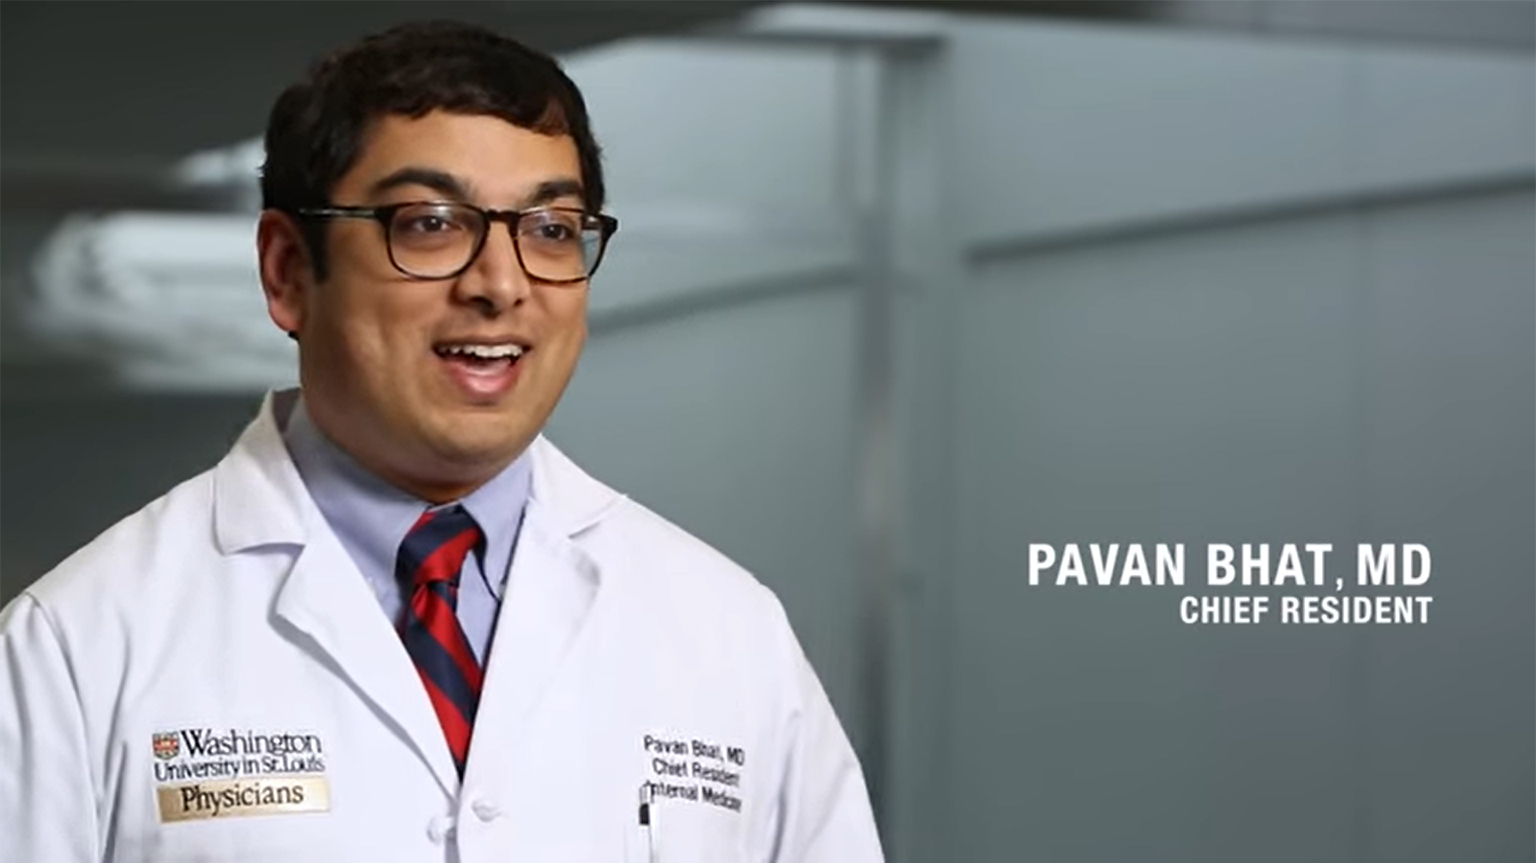 Screenshot of Get to know the chief residents of Washington University video